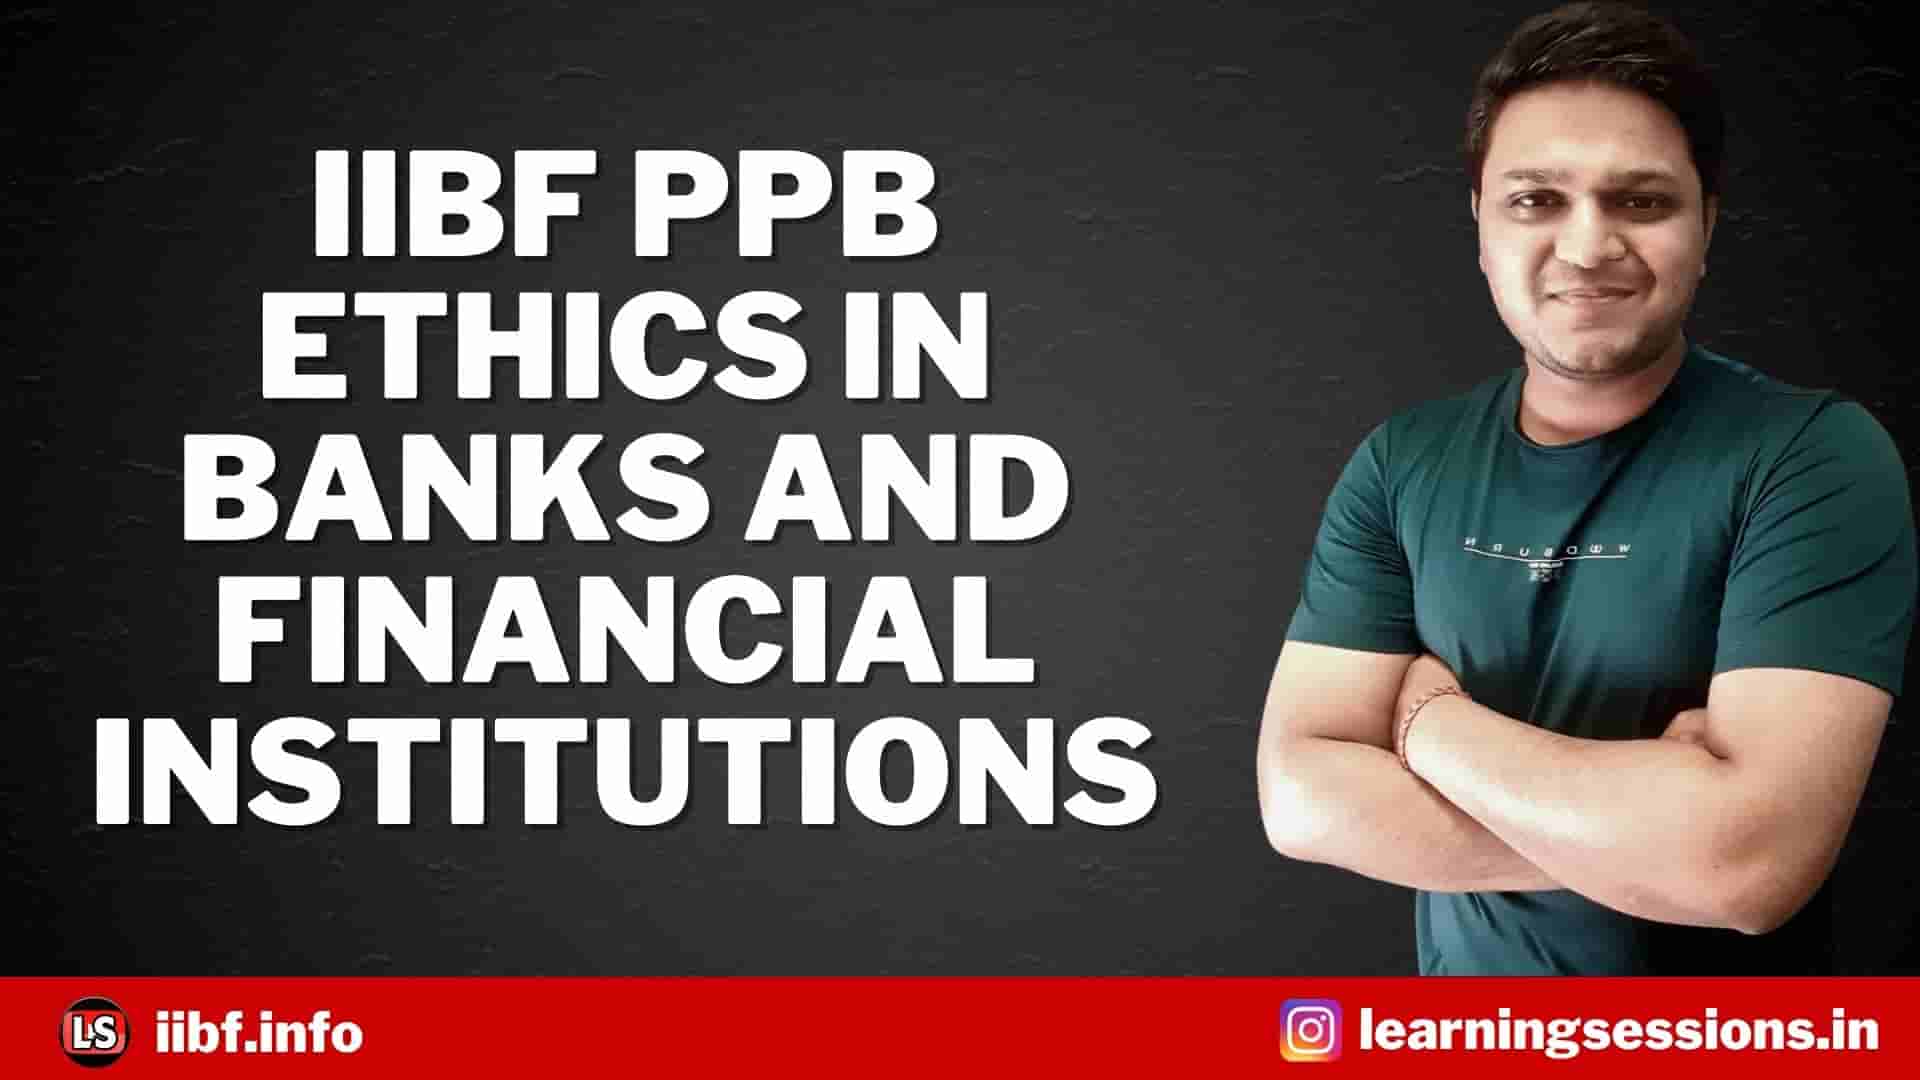 IIBF PPB ETHICS IN BANKS AND FINANCIAL INSTITUTIONS